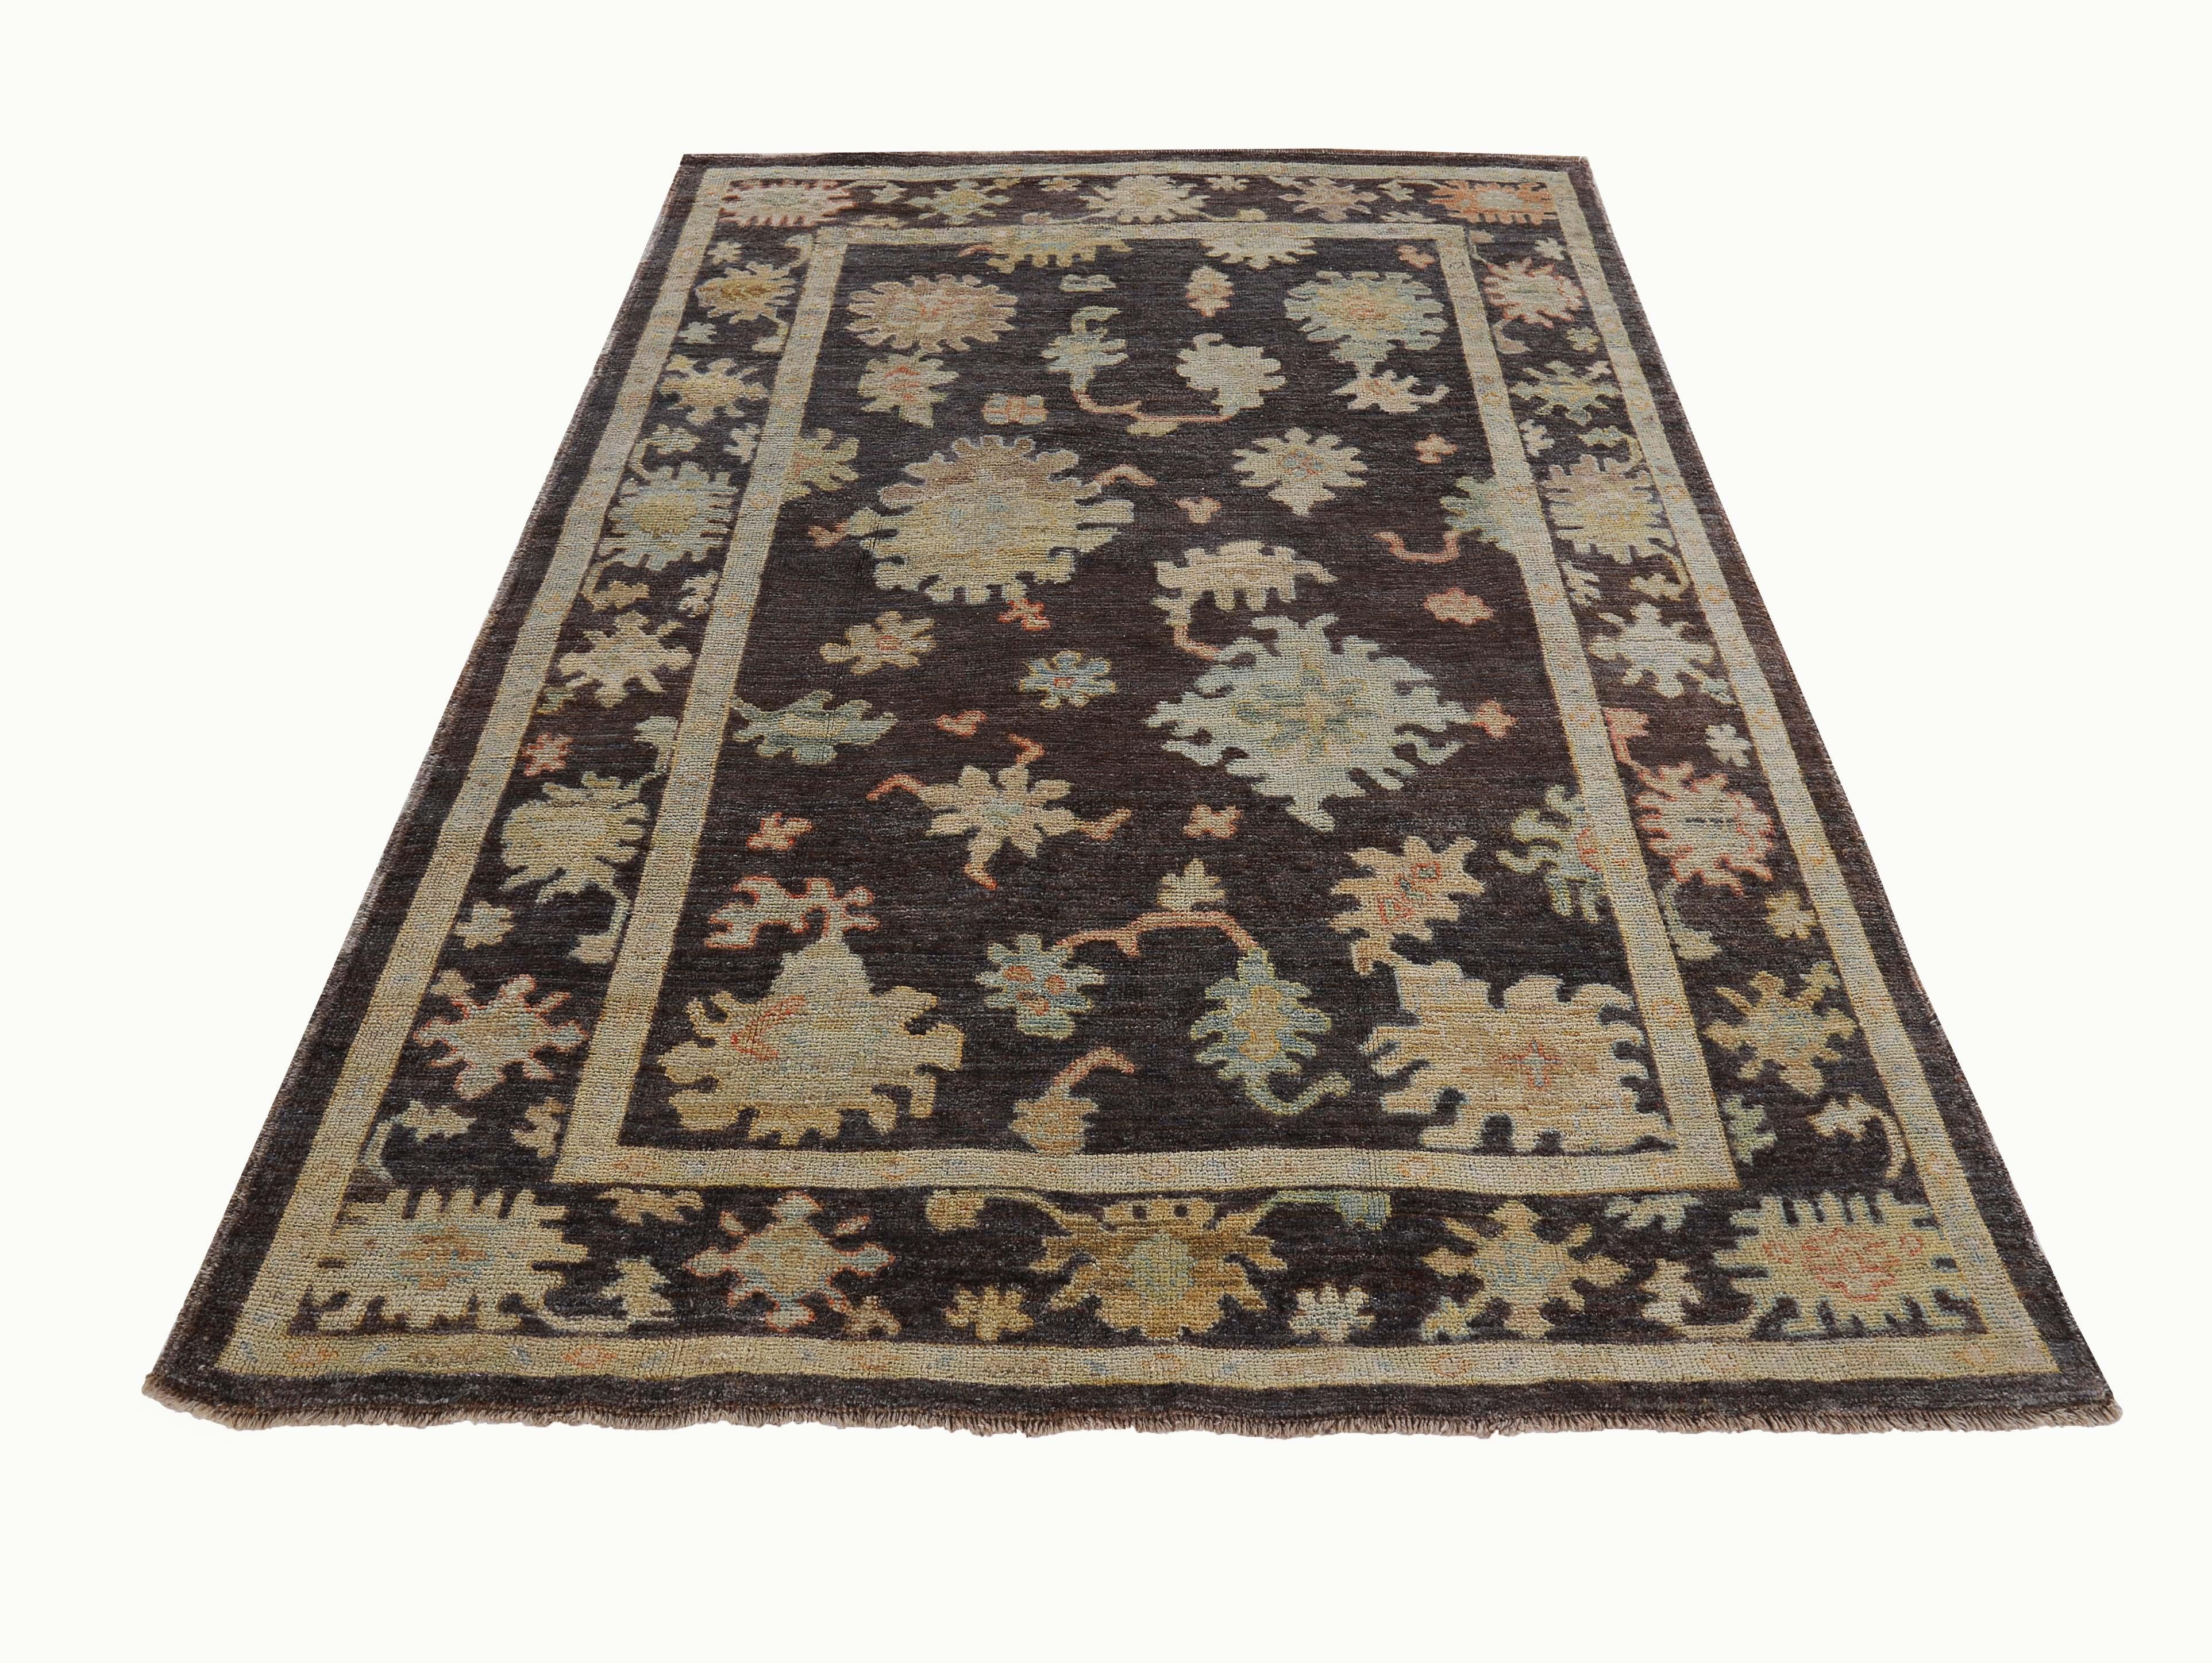 New Turkish rug made of handwoven sheep’s wool of the finest quality. It’s colored with organic vegetable dyes that are certified safe for humans and pets alike. It features floral details in brown, yellow and blue over a blue field. Flower patterns